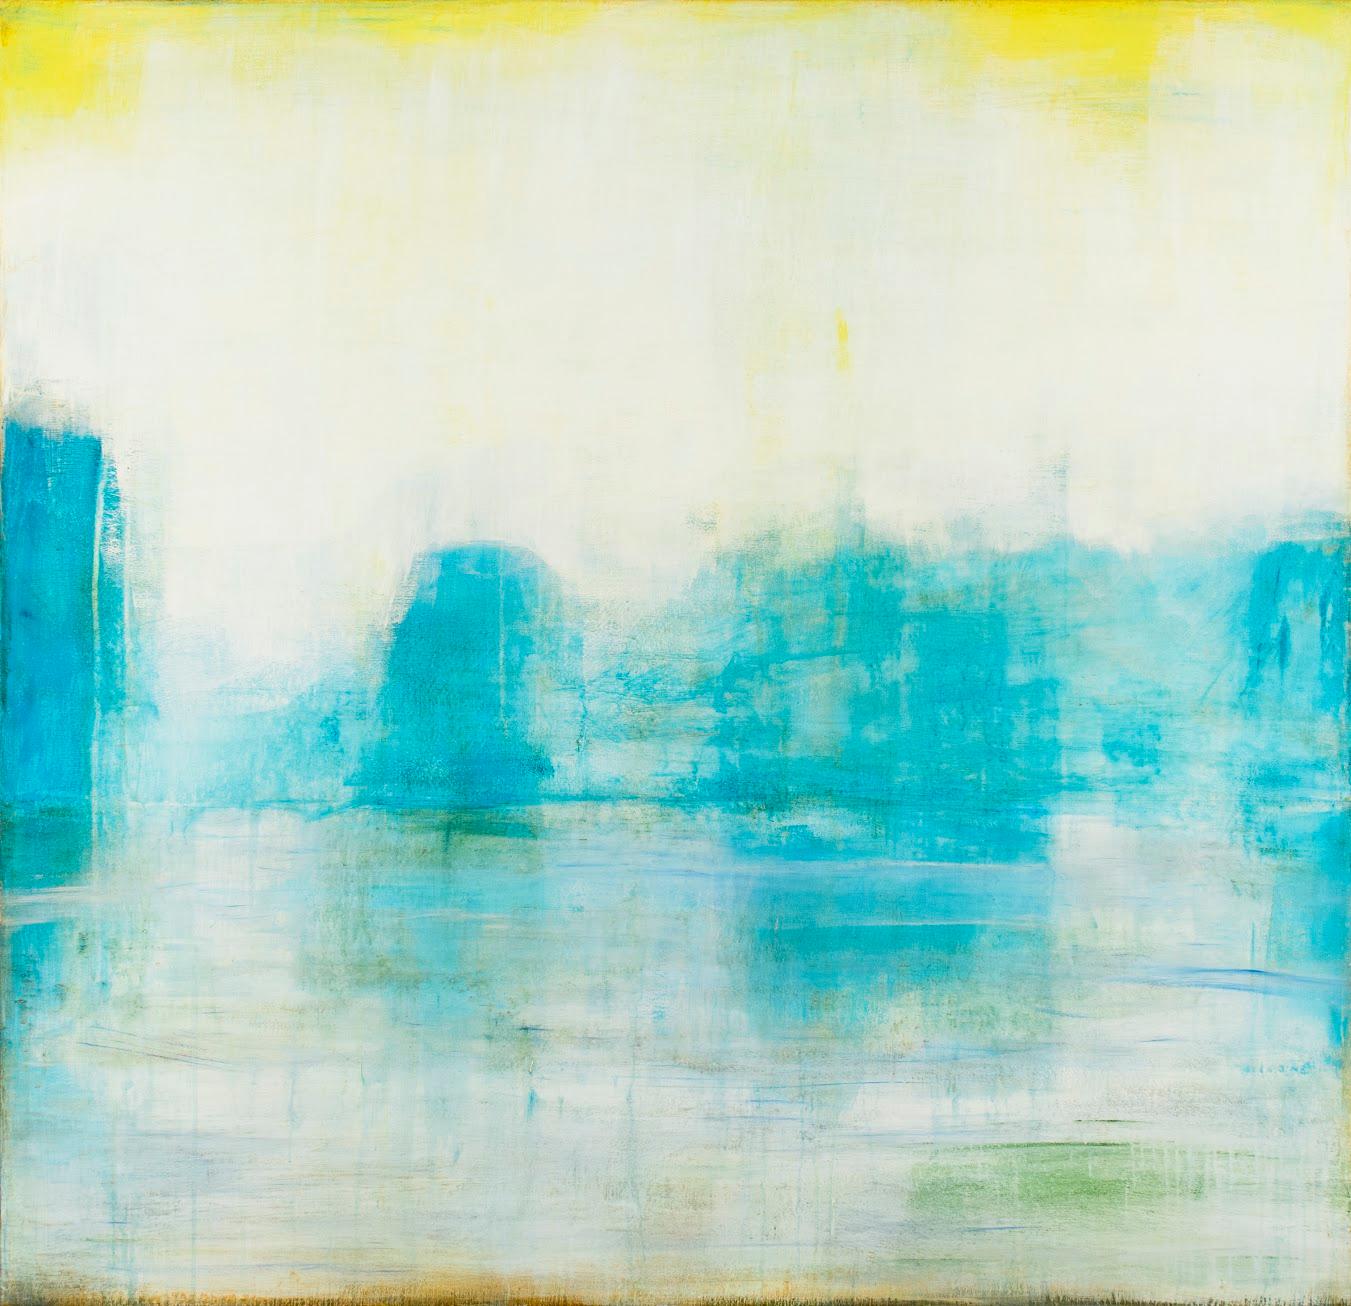 Shawn Dulaney Abstract Painting - "Changiness"   Luminous Abstraction in Yellow/White/Turquoise   Water Reference 